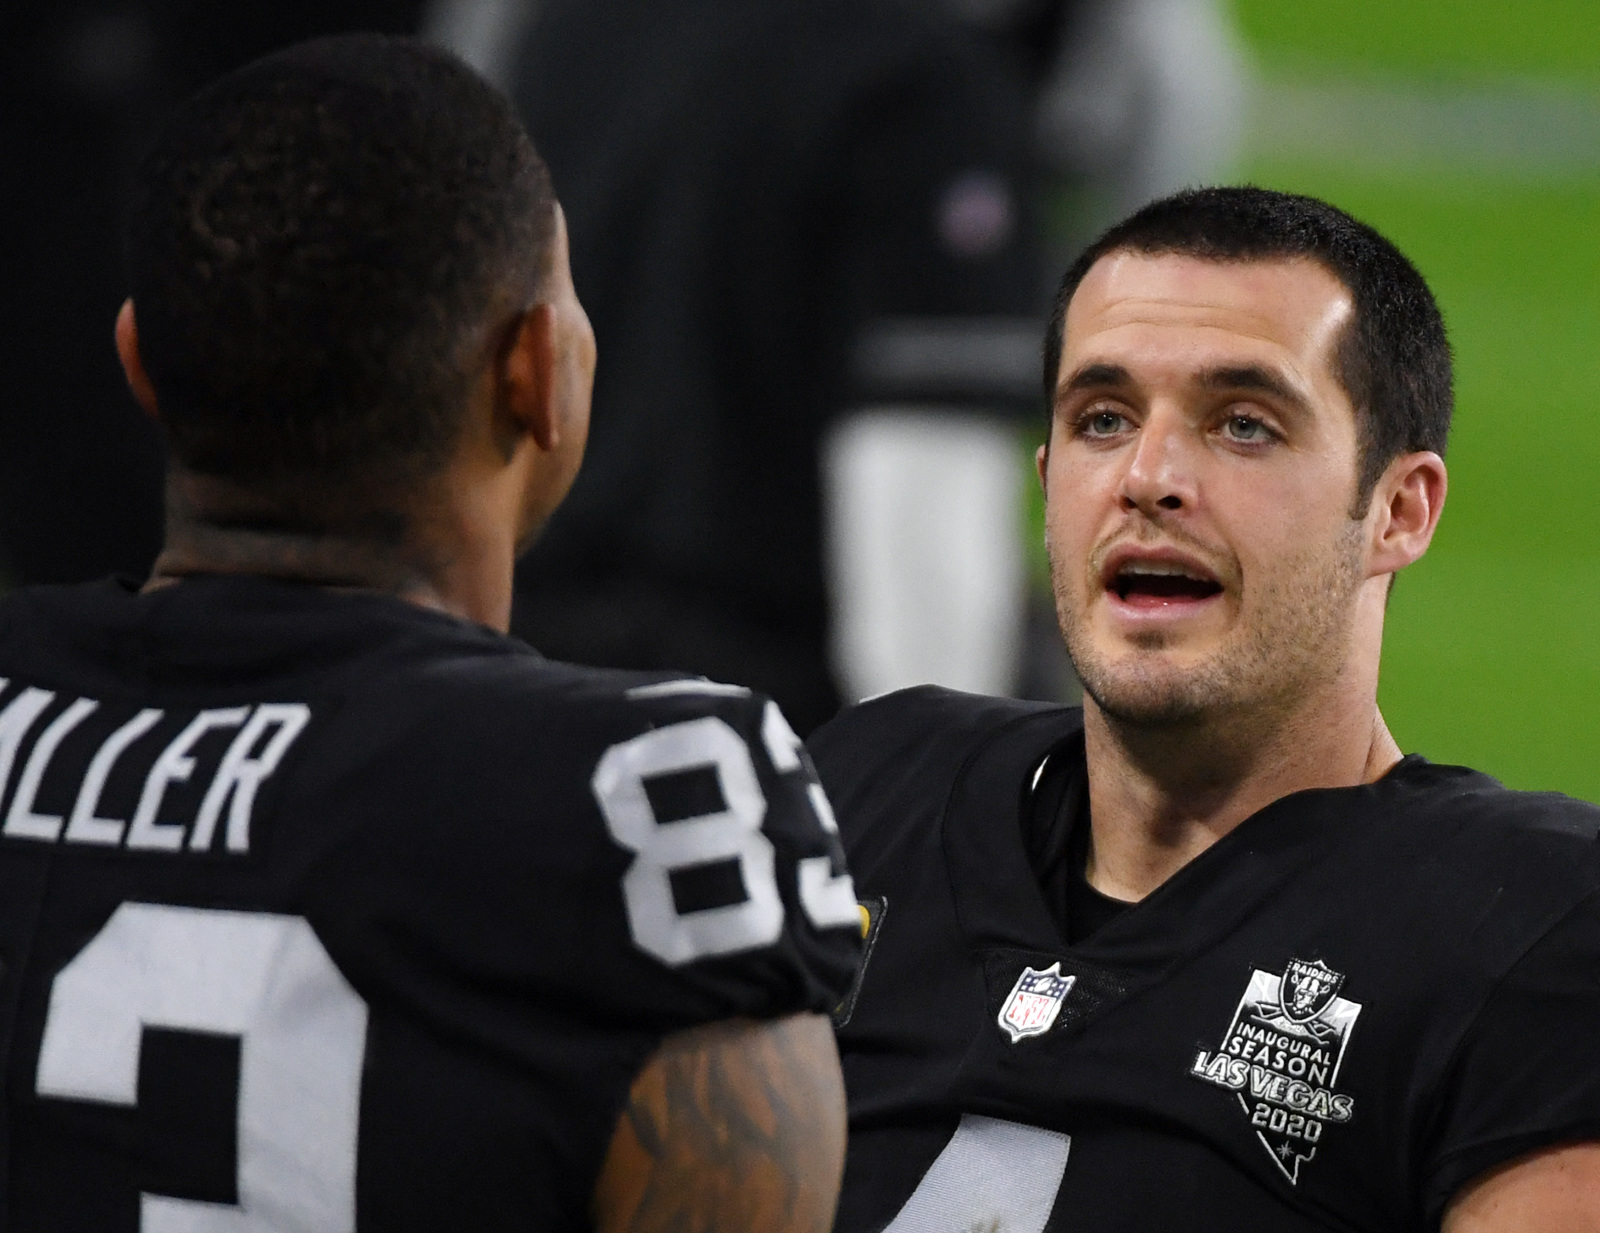 Derek Carr, LV Raiders Players Fined For Going Maskless At Charity